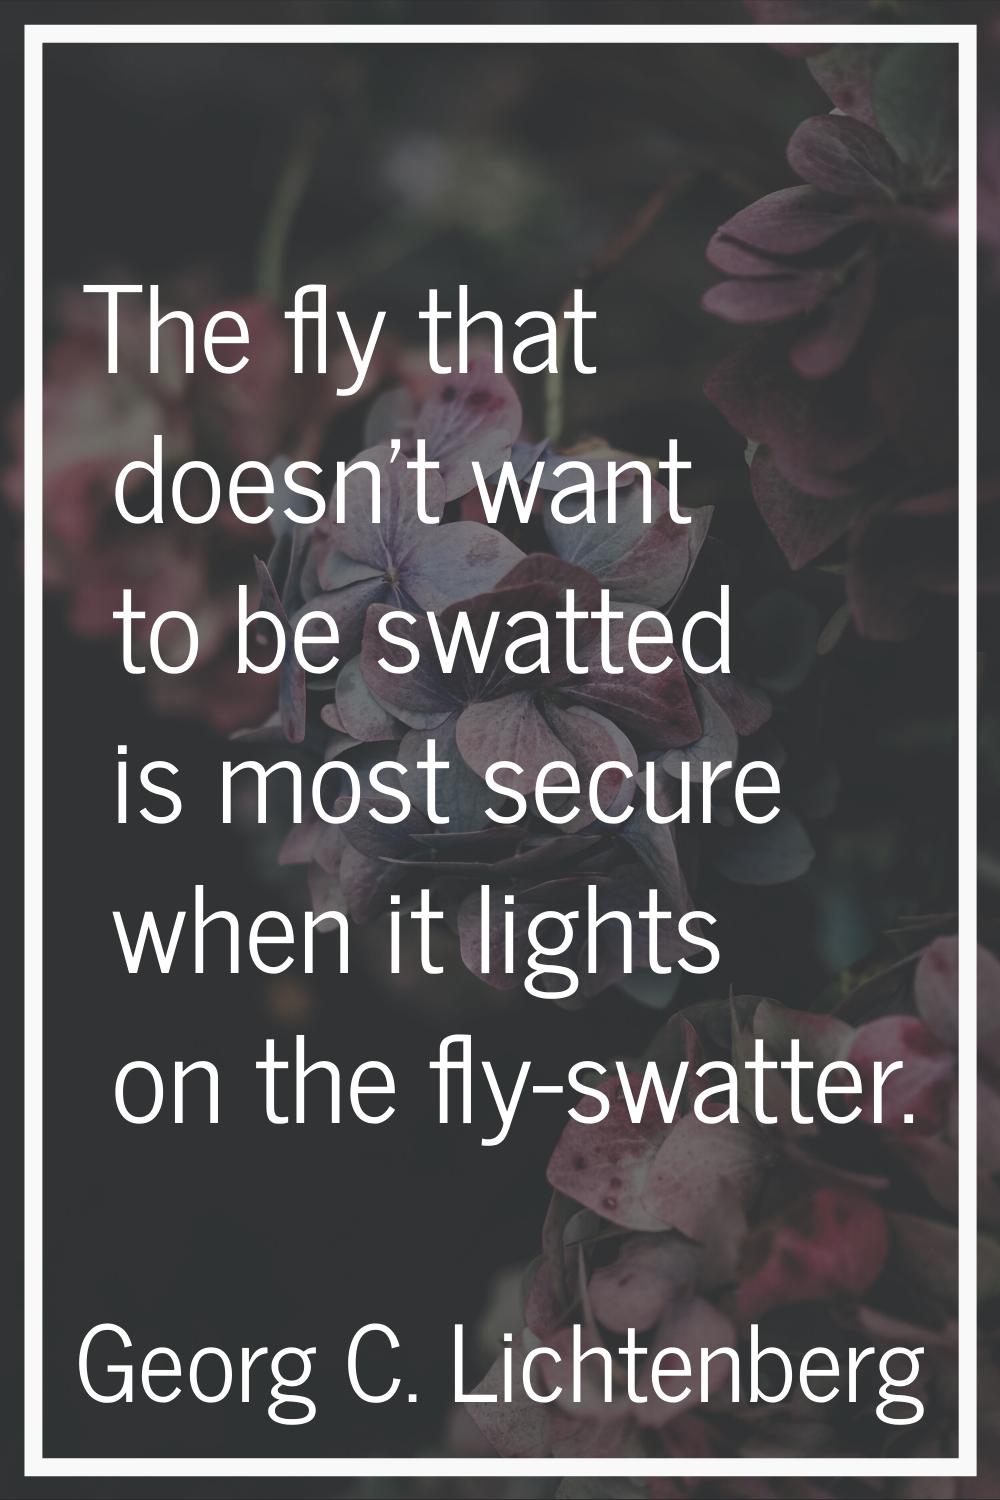 The fly that doesn't want to be swatted is most secure when it lights on the fly-swatter.